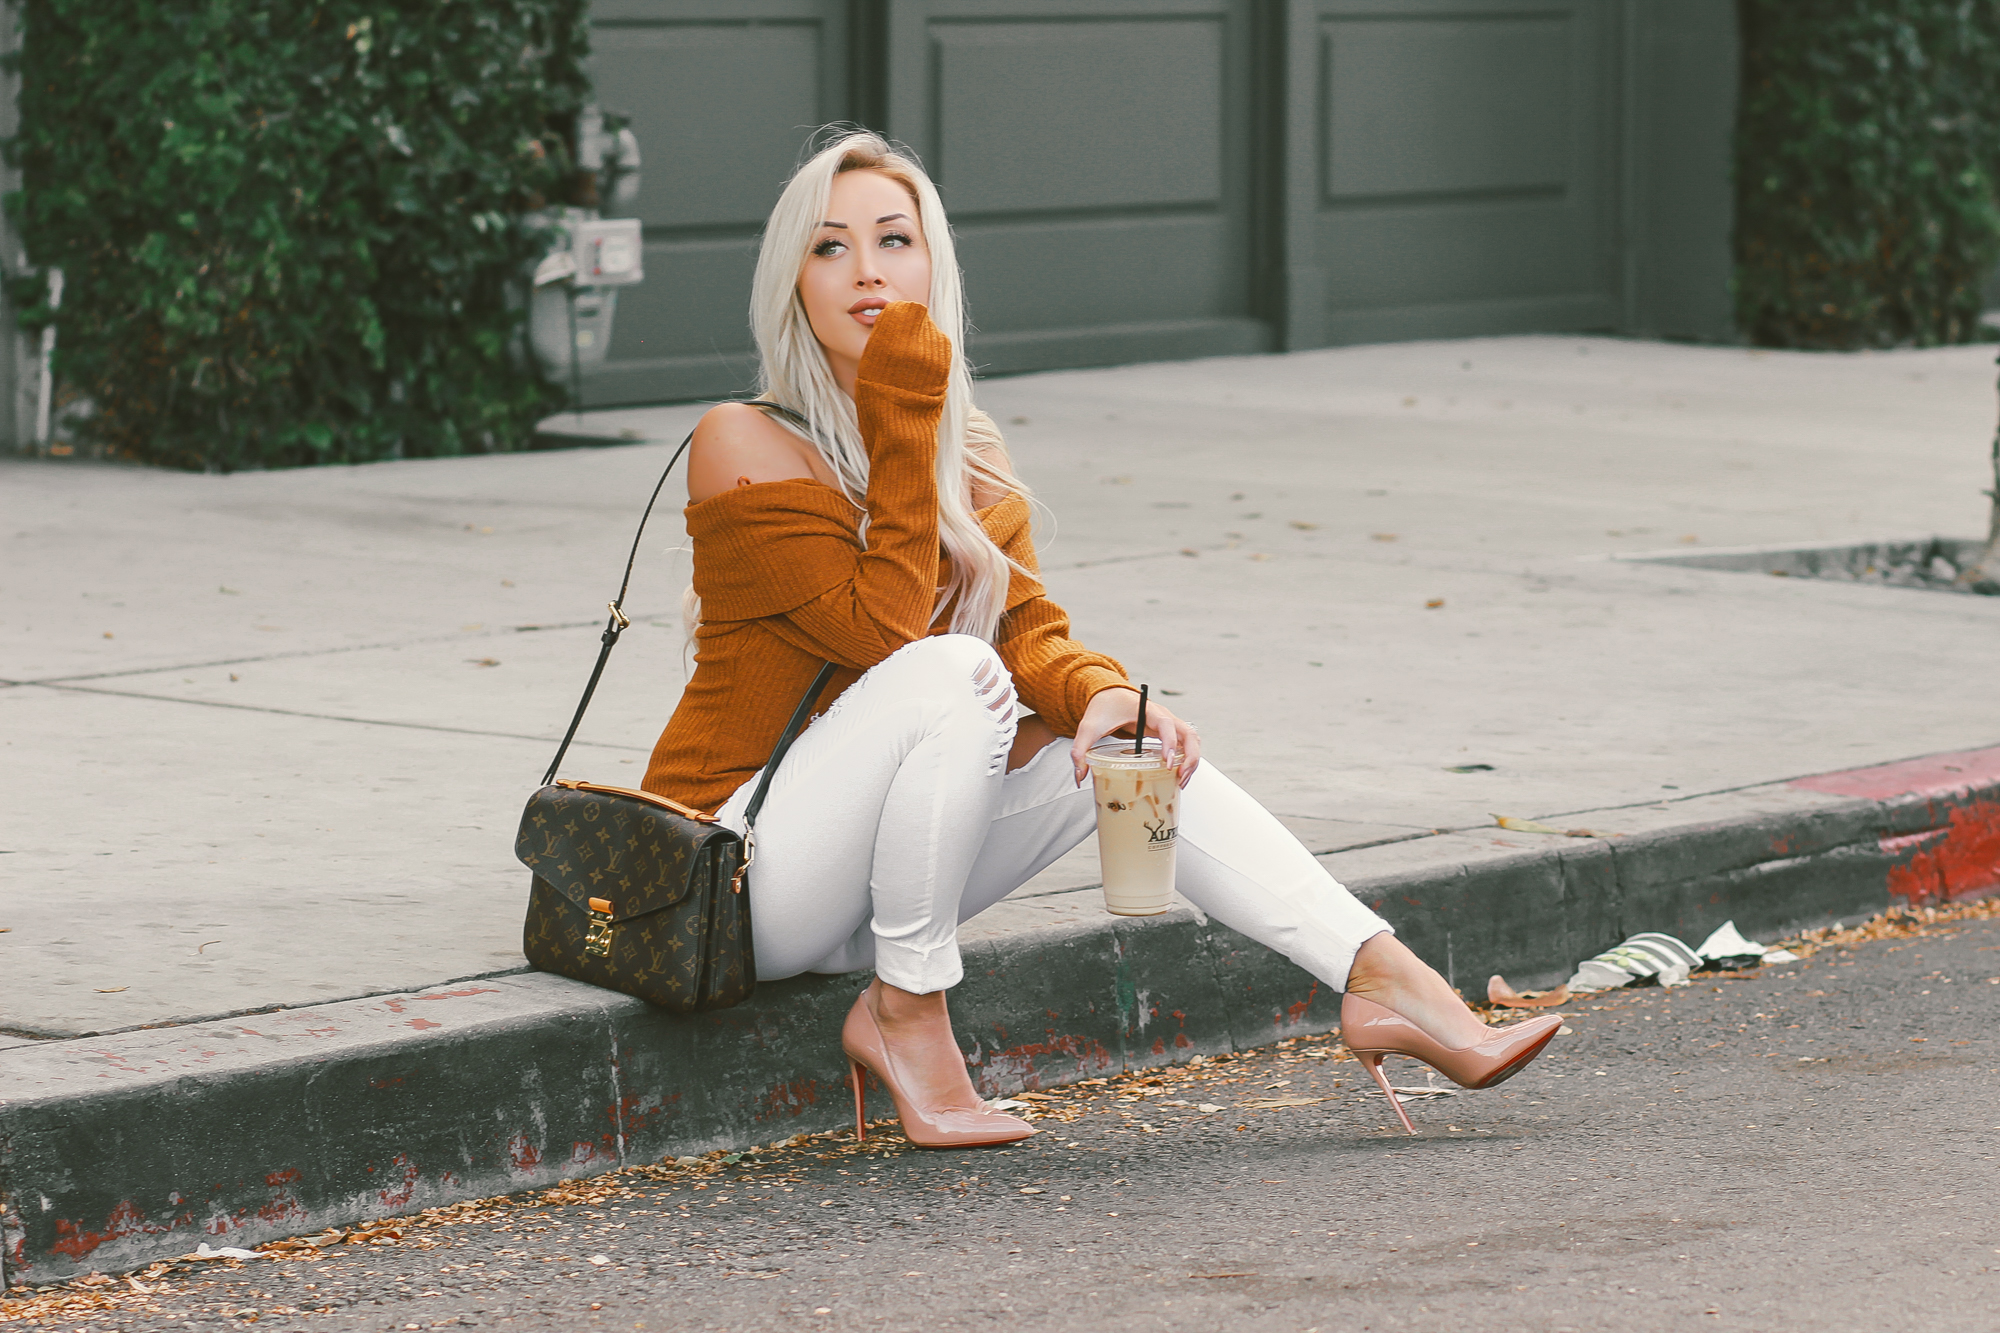 November Vibes | Off The Shoulder Sweater & White Distressed Denim @fashionnova | Blondie in the City